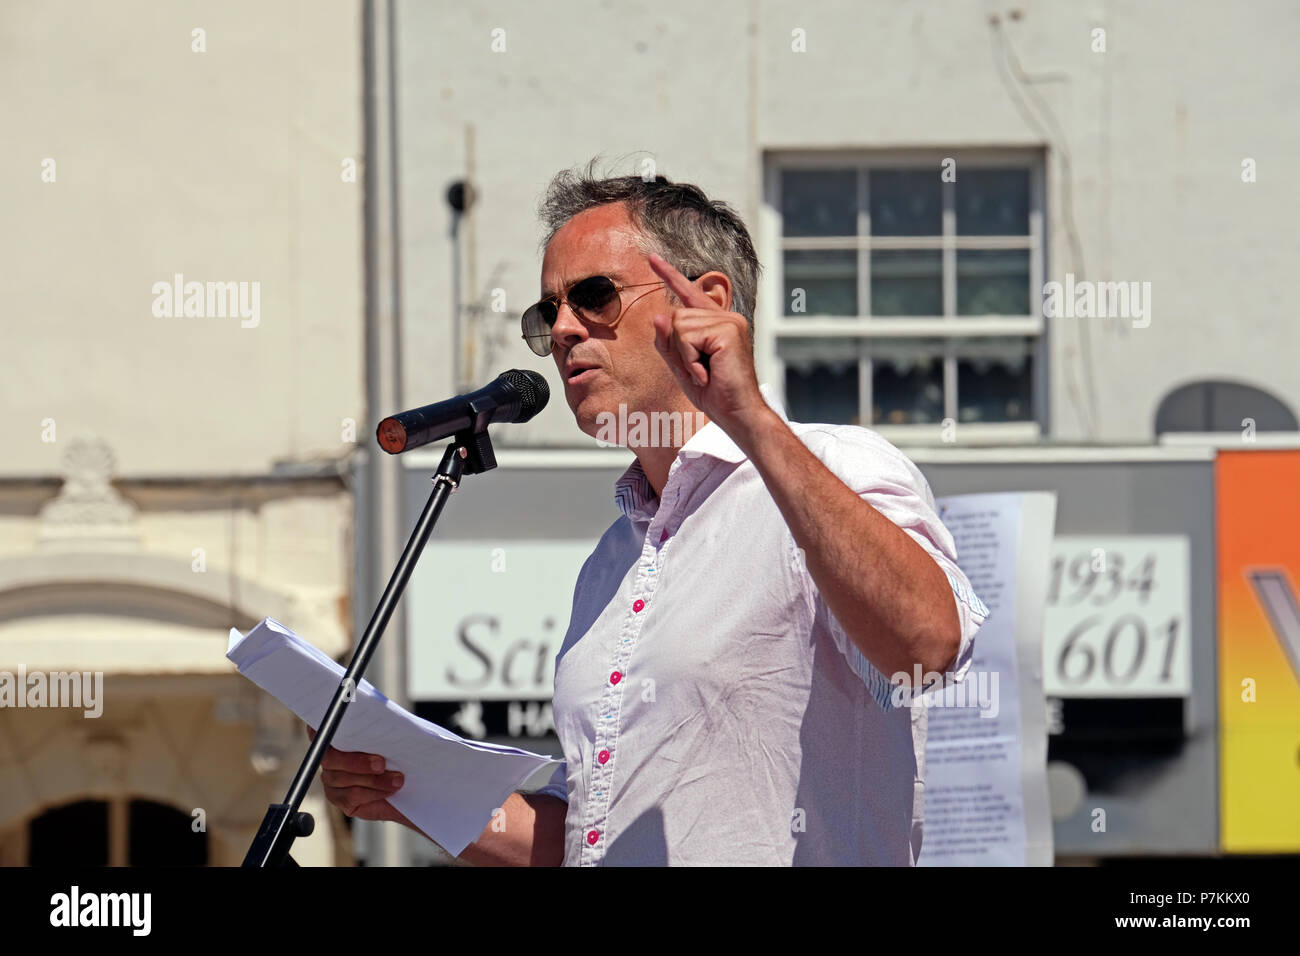 Weston-super-Mare, UK. 7th July, 2018. Jonathan Bartley, co-leader of the Green Party of England and Wales, speaks at a demonstration against the overnight closure of the accident and emergency department at Weston General Hospital. Despite assurances that the closure is only a temporary measure, it has been in effect since July 2017, and many people in the area are concerned that it is the prelude to further cuts. Keith Ramsey/Alamy Live News Stock Photo